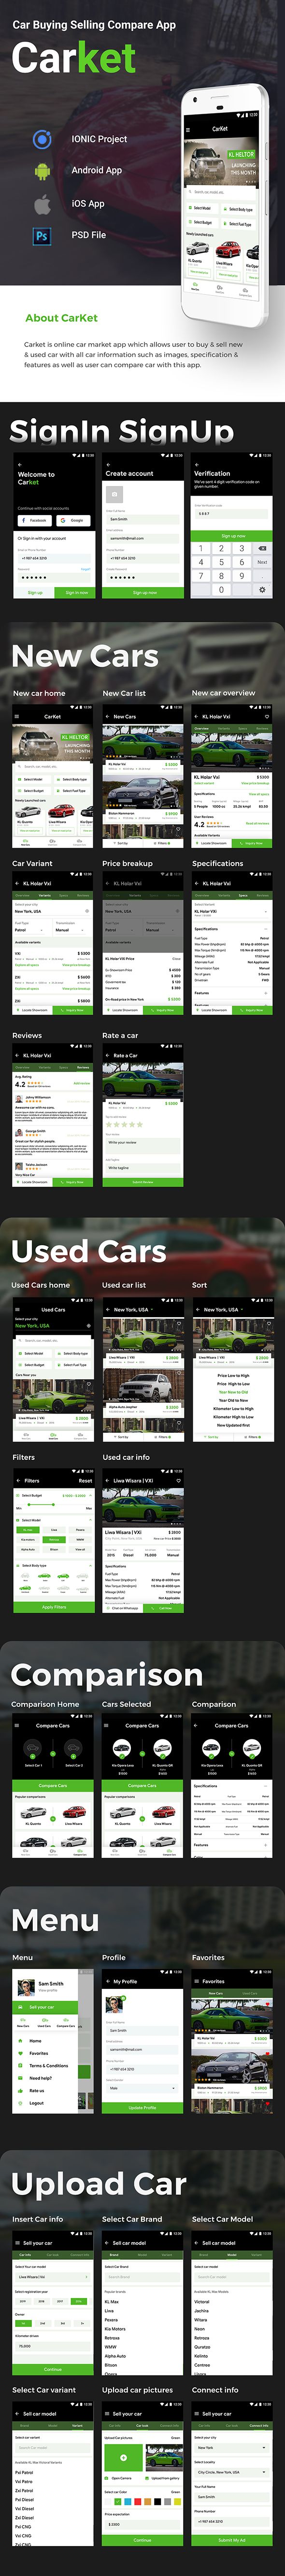 Car Buying and Selling Android App + iOS App Template | HTML + Css IONIC 3 | CarKet - 2